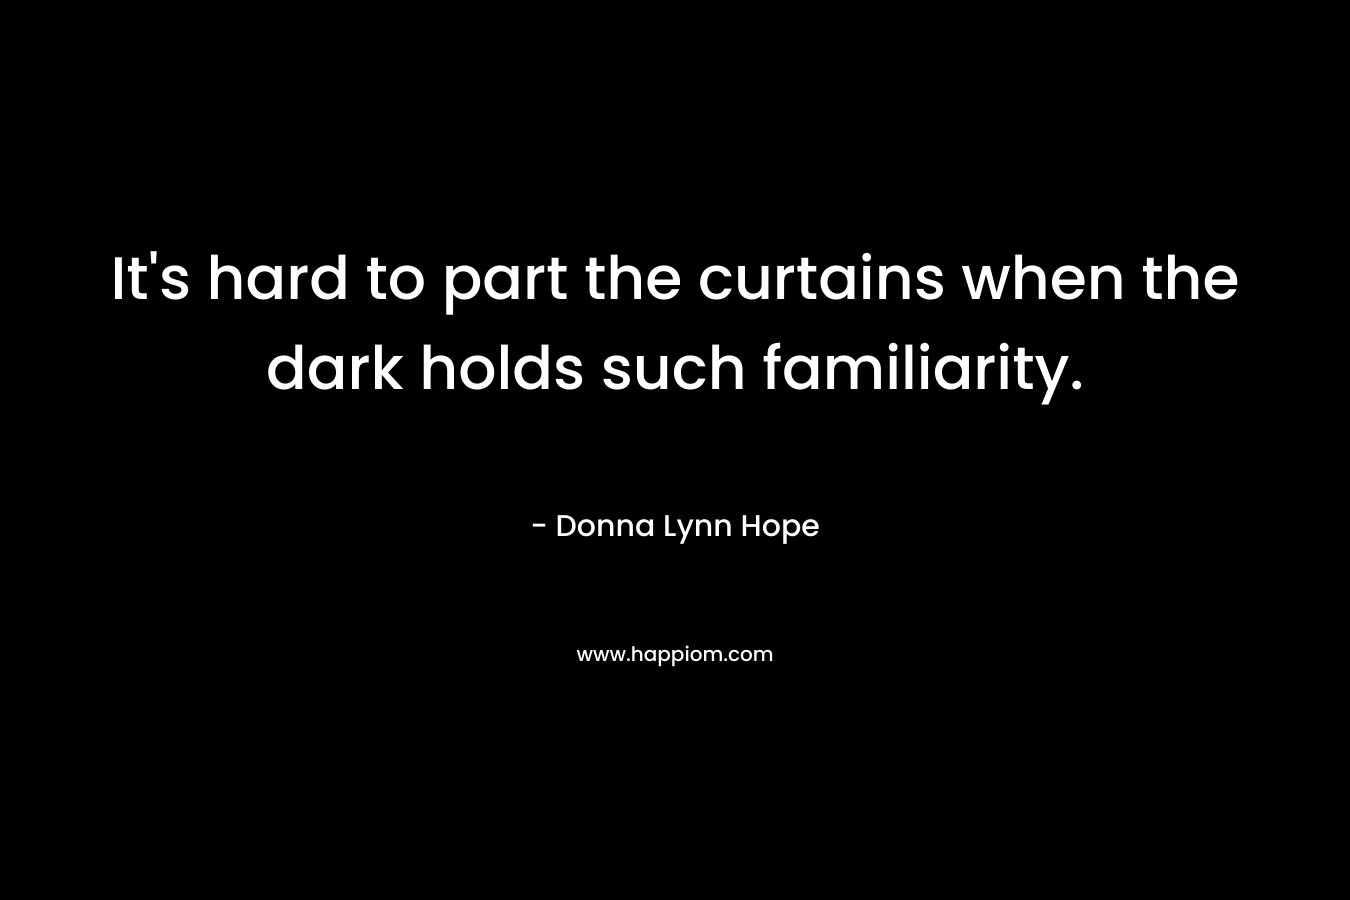 It’s hard to part the curtains when the dark holds such familiarity. – Donna Lynn Hope